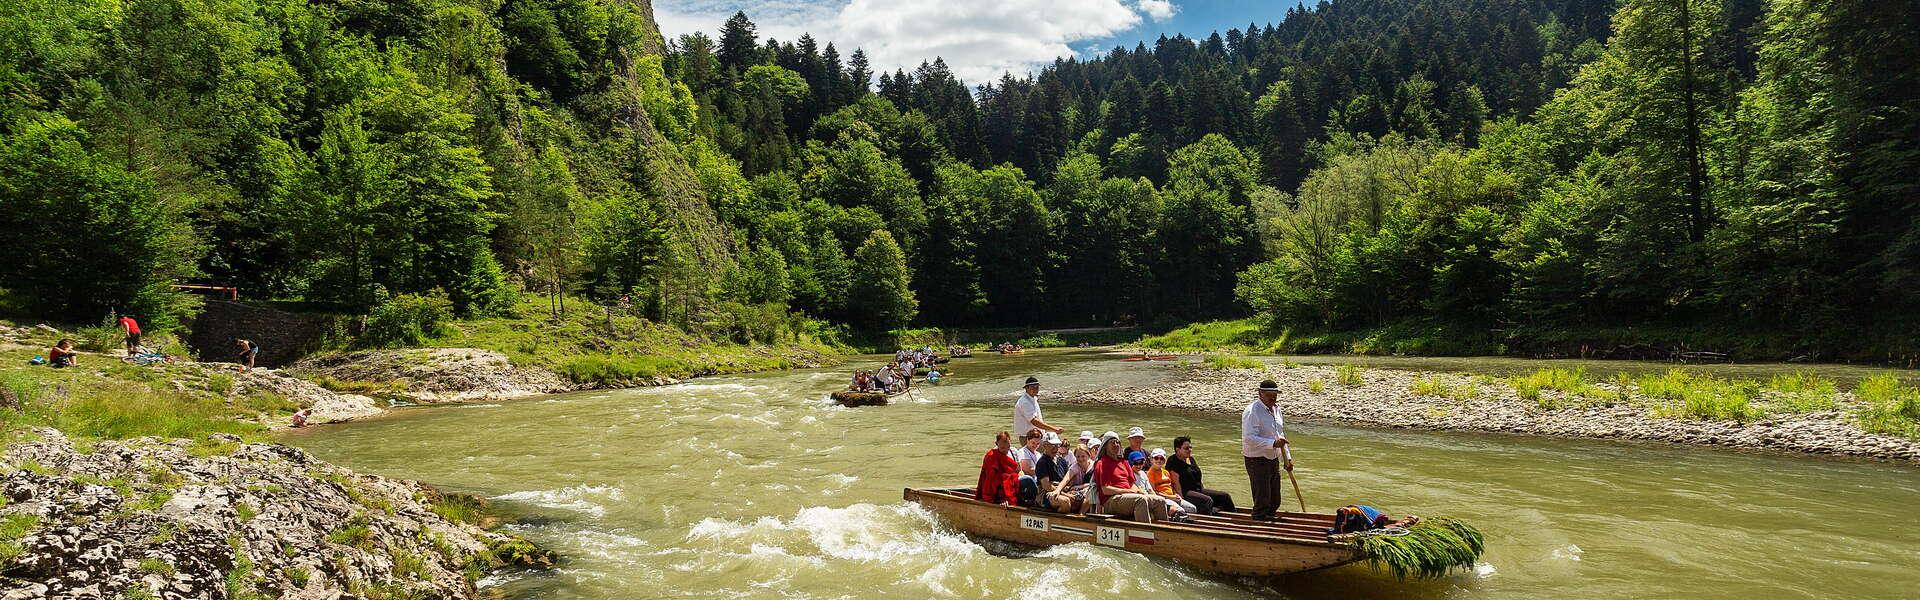 Rafting down the Dunajec River on several rafts. The waves on the Dunajec River are quite high. Limestone rocks form the bank of the river. Three people are sitting on the shore. In the background are the lush Pieniny forest and puffy clouds in the sky.